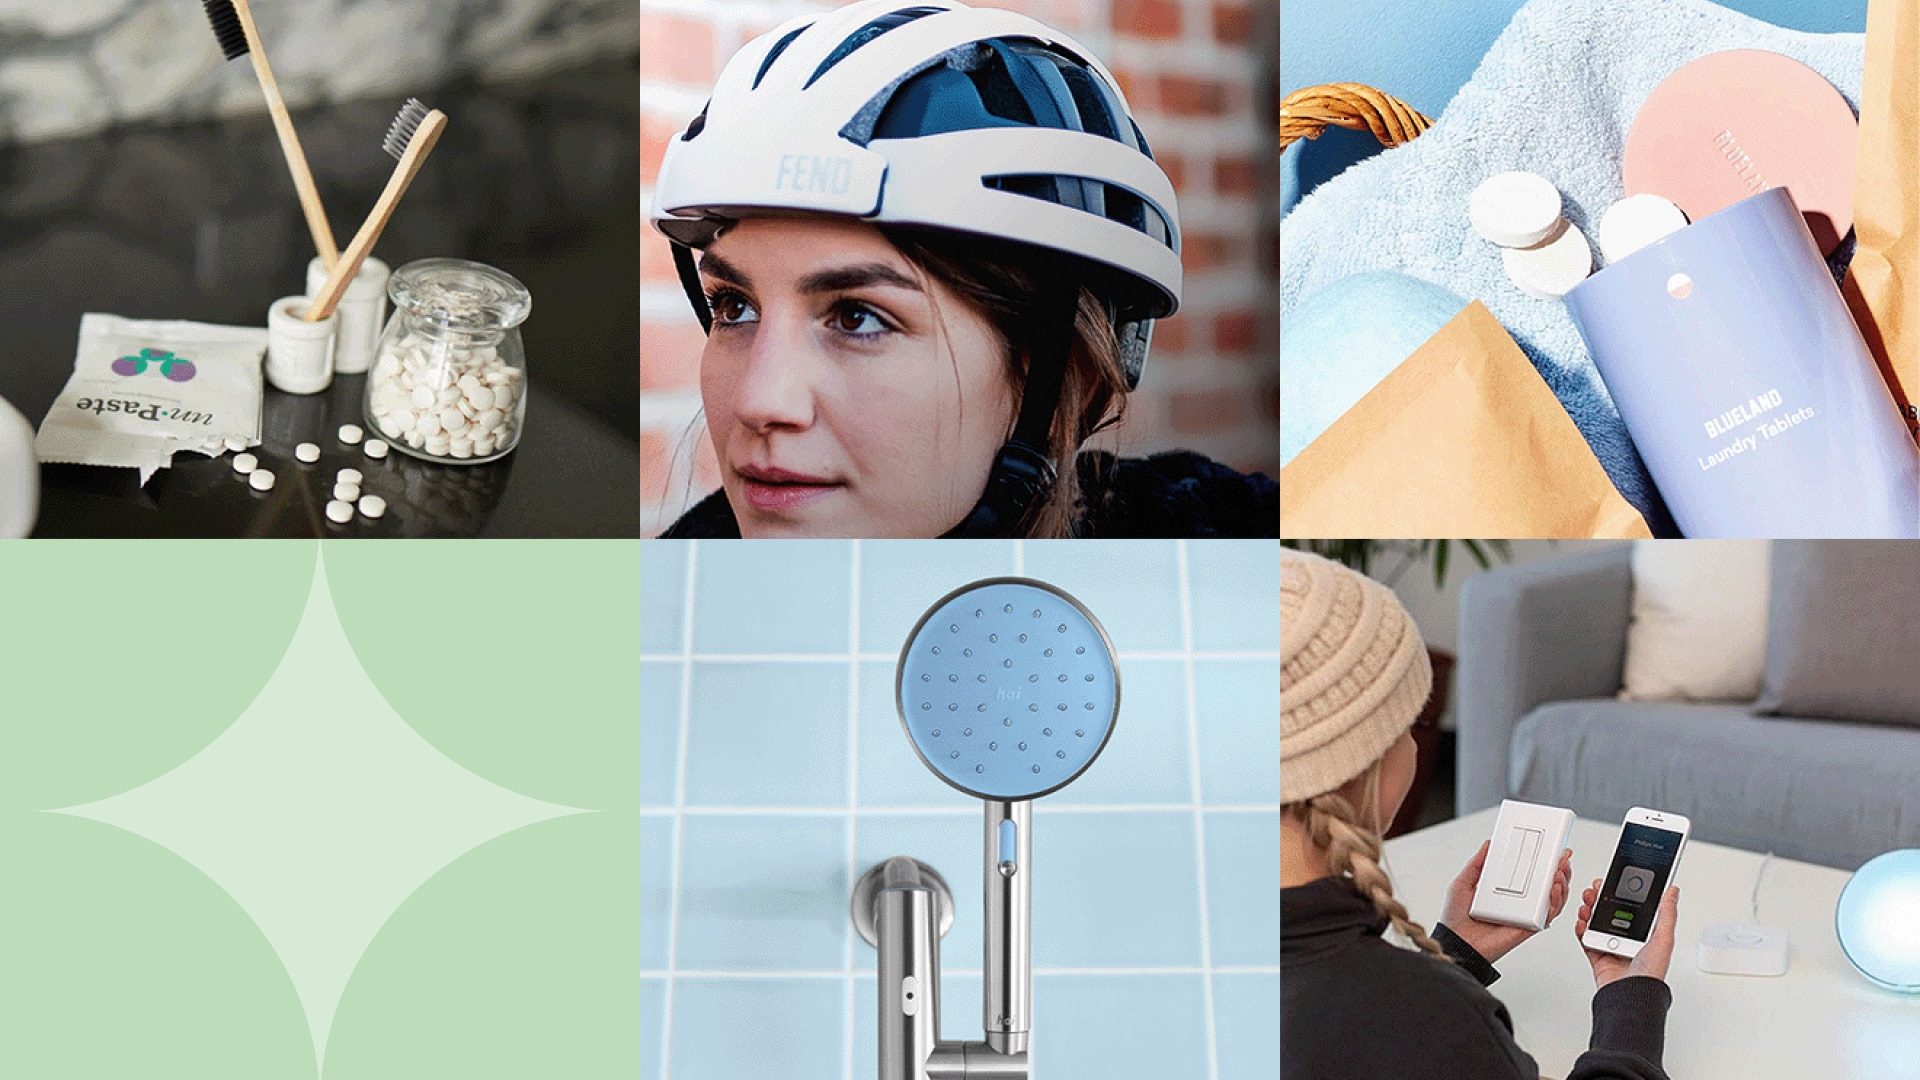 Collage of products including a toothbrush and toothpaste tablets, a woman wearing a bike helmet, laundry tablets shown in a laundry basket, a showerhead, and a woman holding her phone in one hand and wireless lightswitch.